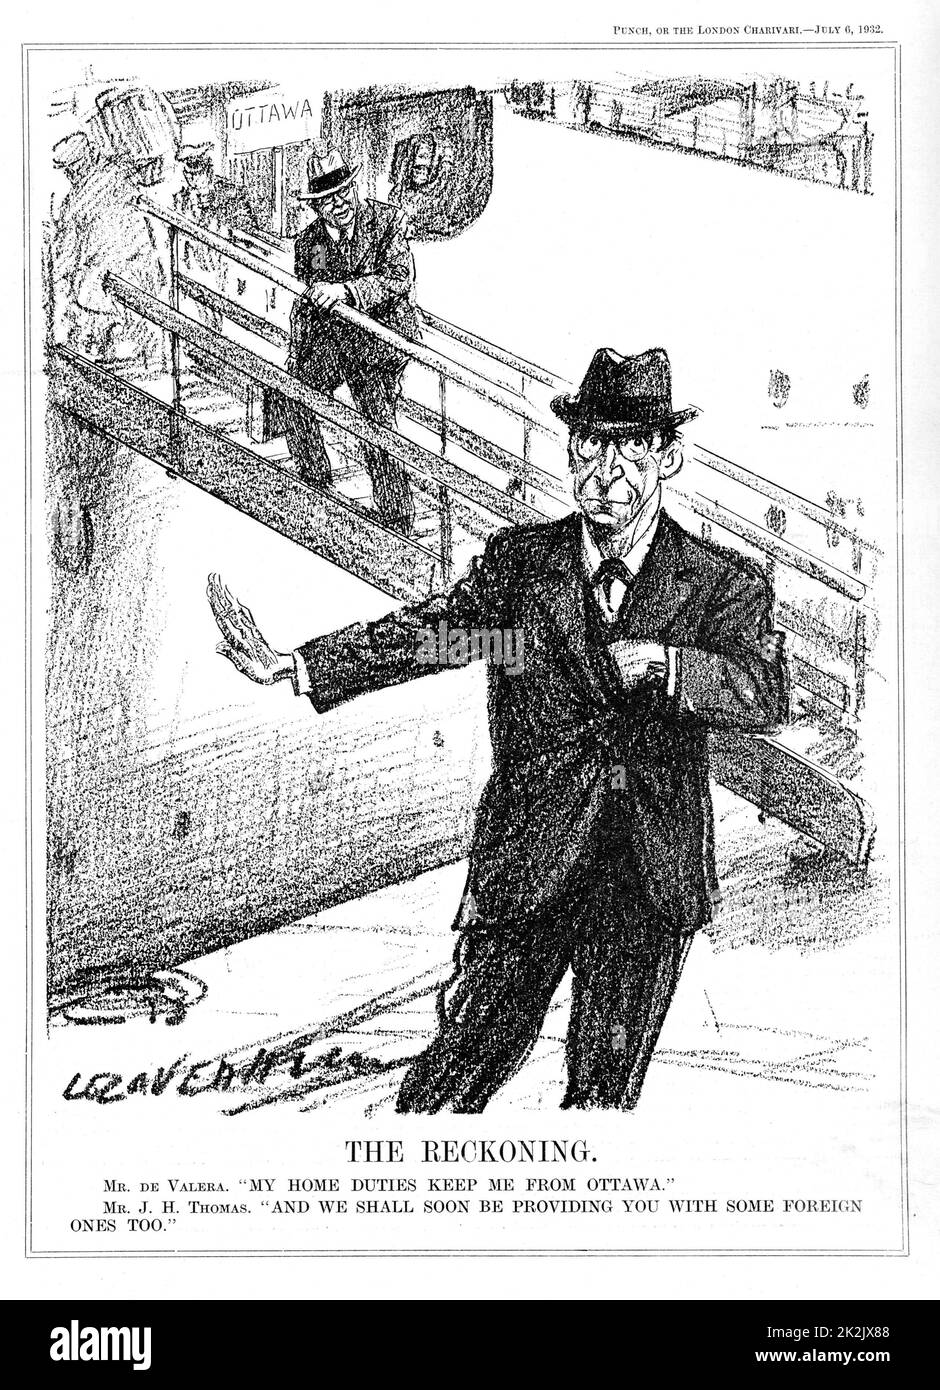 Eamon De Valera (1882-1975) American-born Irish statesman, declining the opportunity to attend the Ottawa Conference on tarriffs because his duties at home in the Irish Free State, where he had just come into power,. Cartoon from 'Punch' (London, 6 July 1932). Artist Leonard Raven-Hill (1867-1942) British Stock Photo